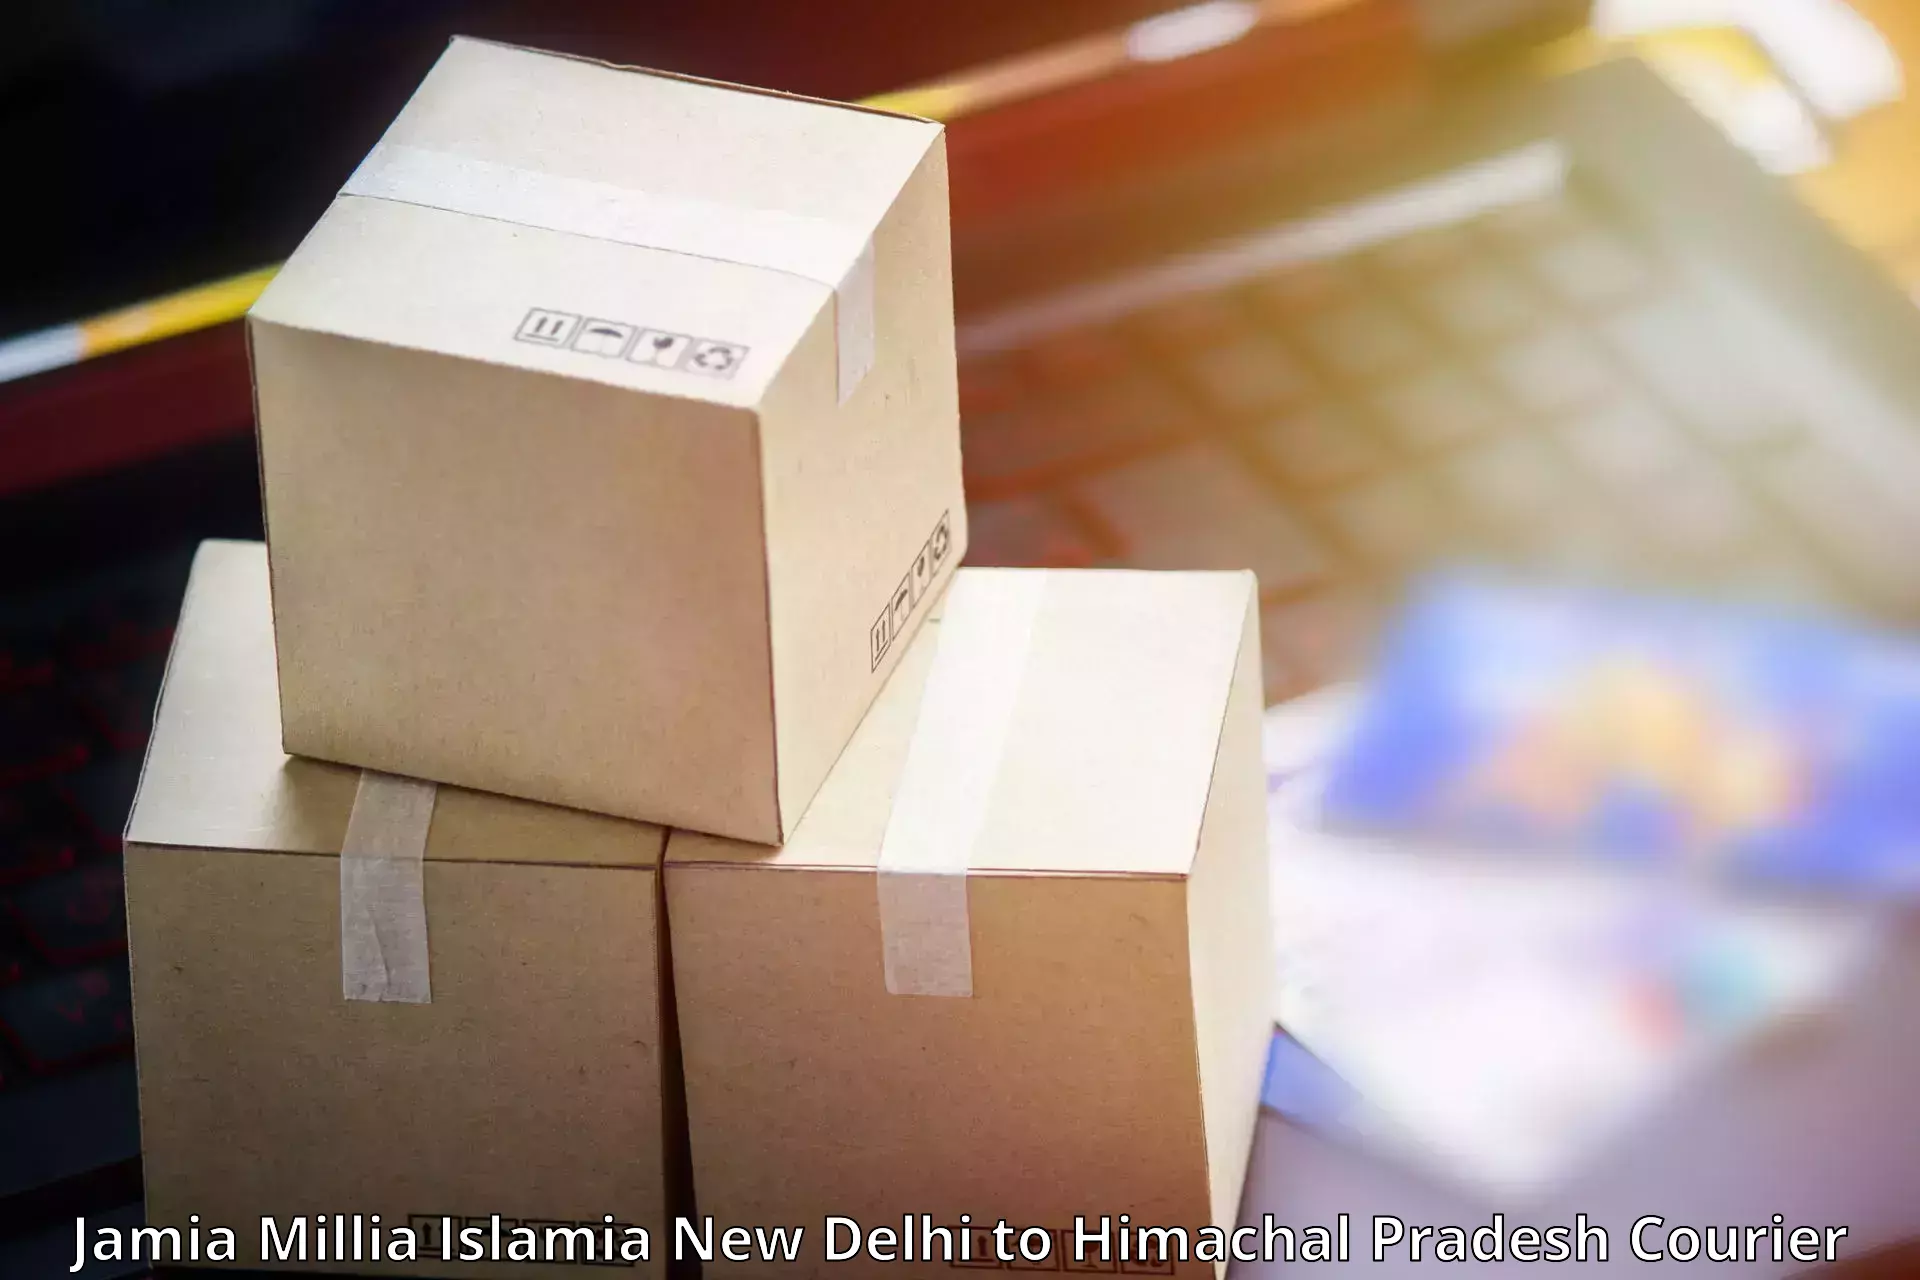 Express courier facilities Jamia Millia Islamia New Delhi to YS Parmar University of Horticulture and Forestry Solan